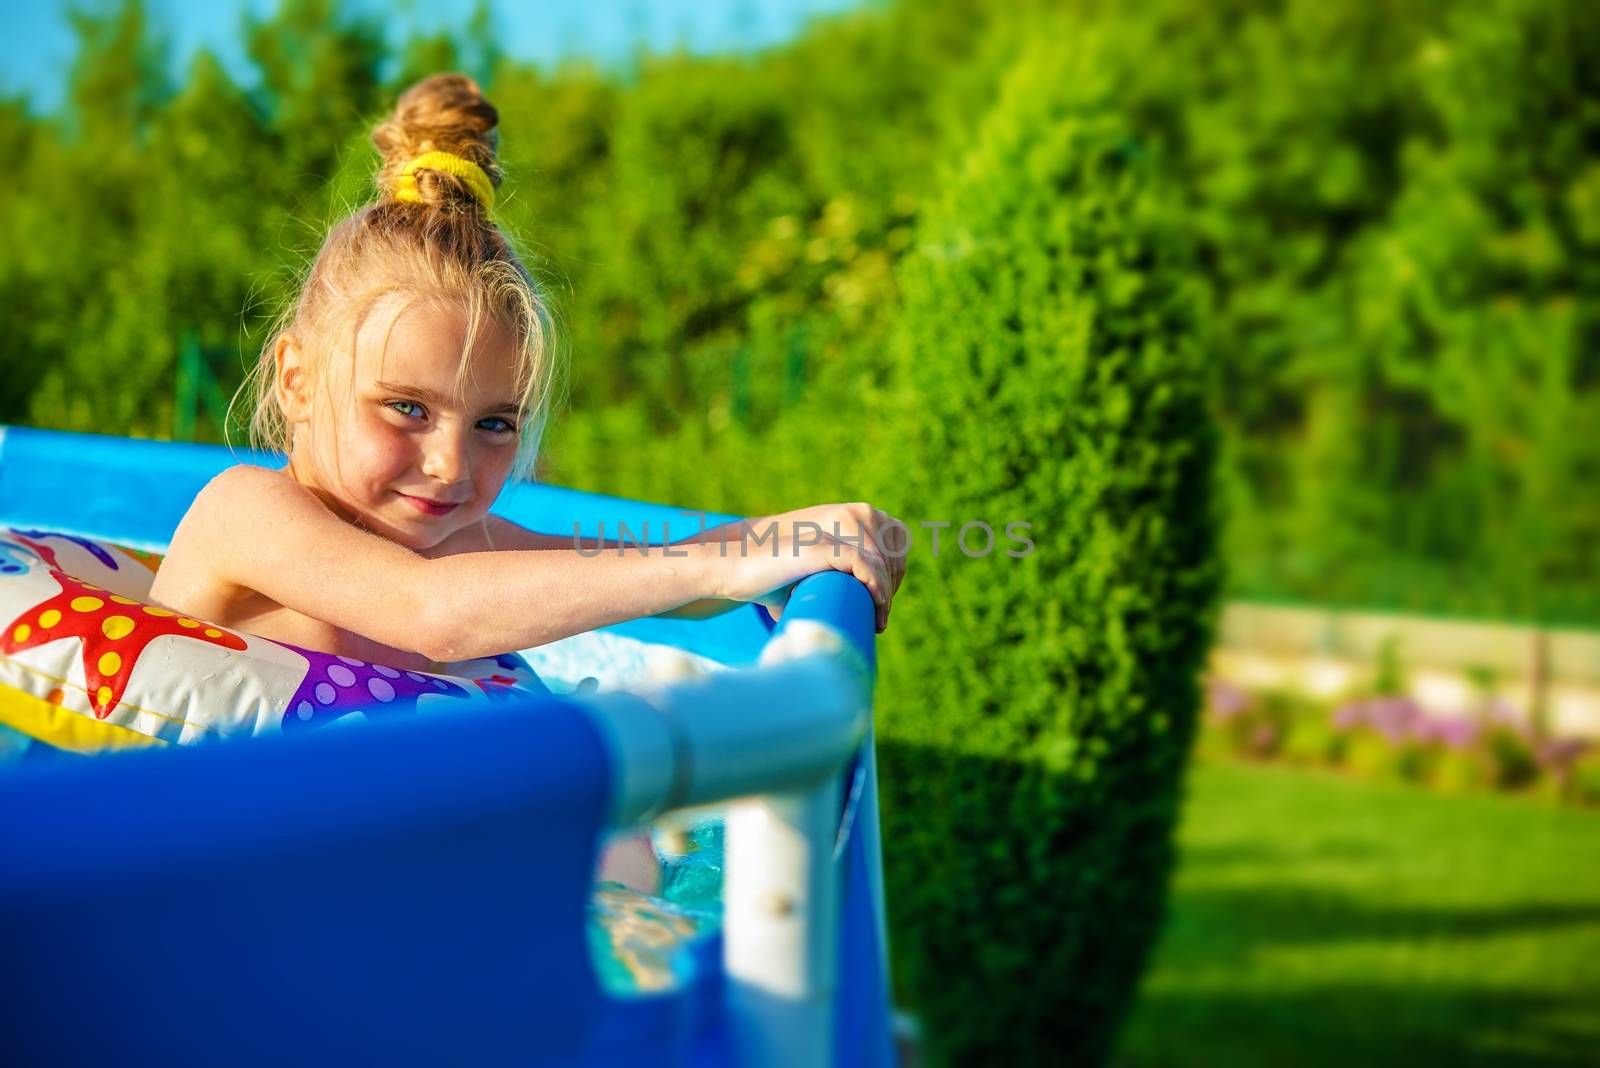 Little Smiling Girl in a Home Backyard Swimming Pool in Hot Summer Day.